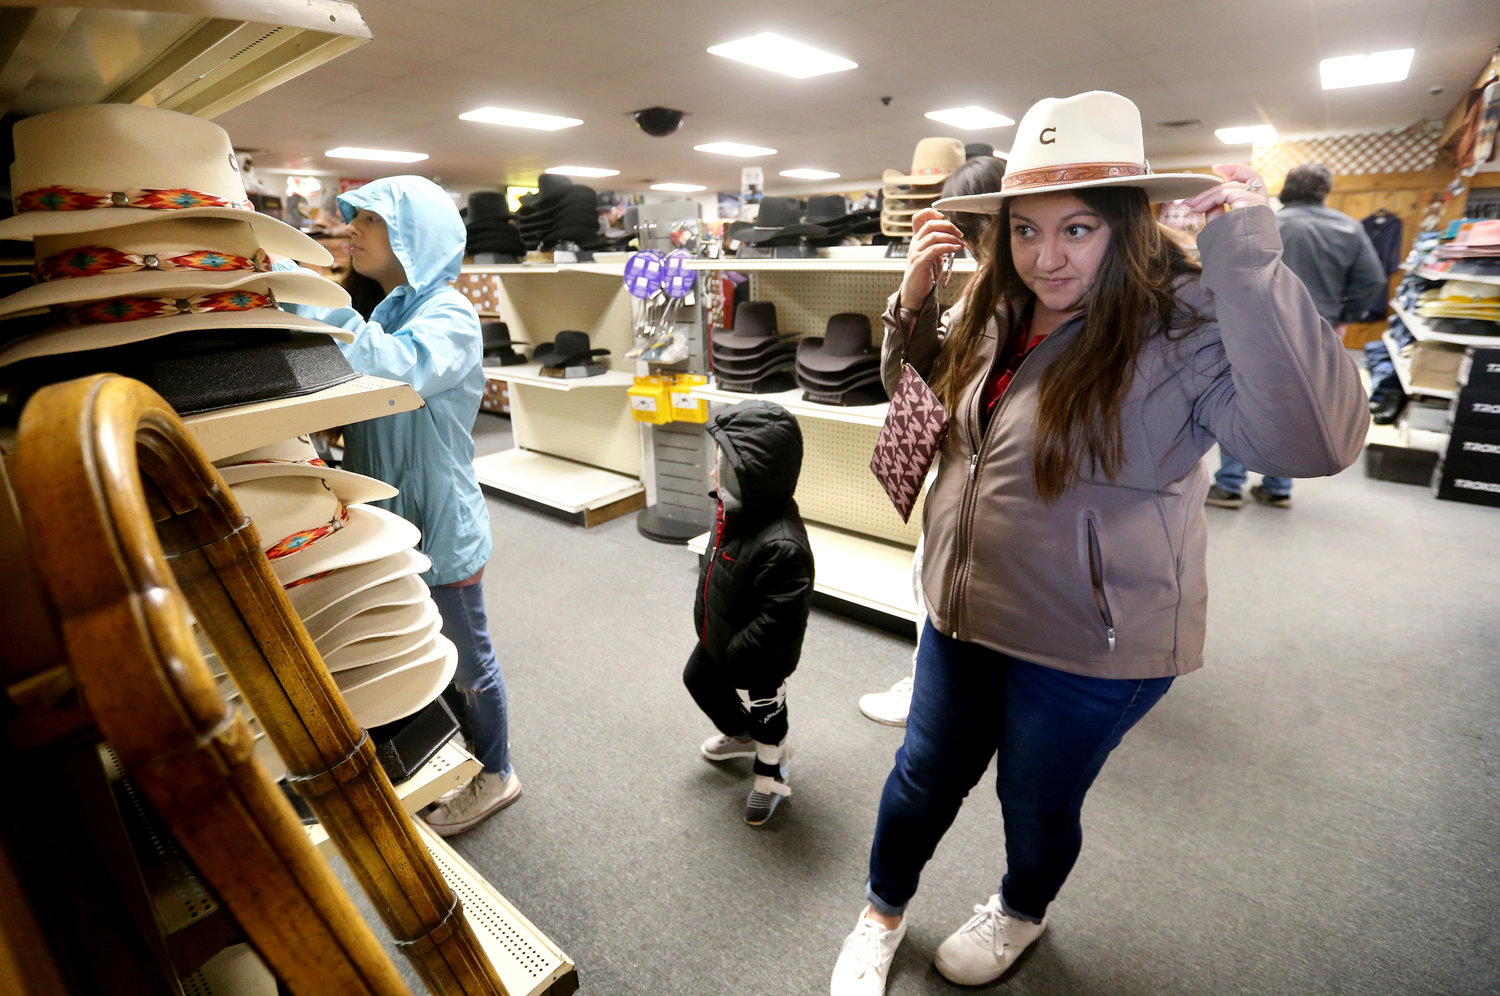 Irene Schaefer, of Johnson Creek, Wis., shops for hats at Longhorn Saddlery in Dubuque, Iowa, on Friday, Dec. 30, 2022. On Wednesday, the Commerce Department releases U.S. retail sales data for December.